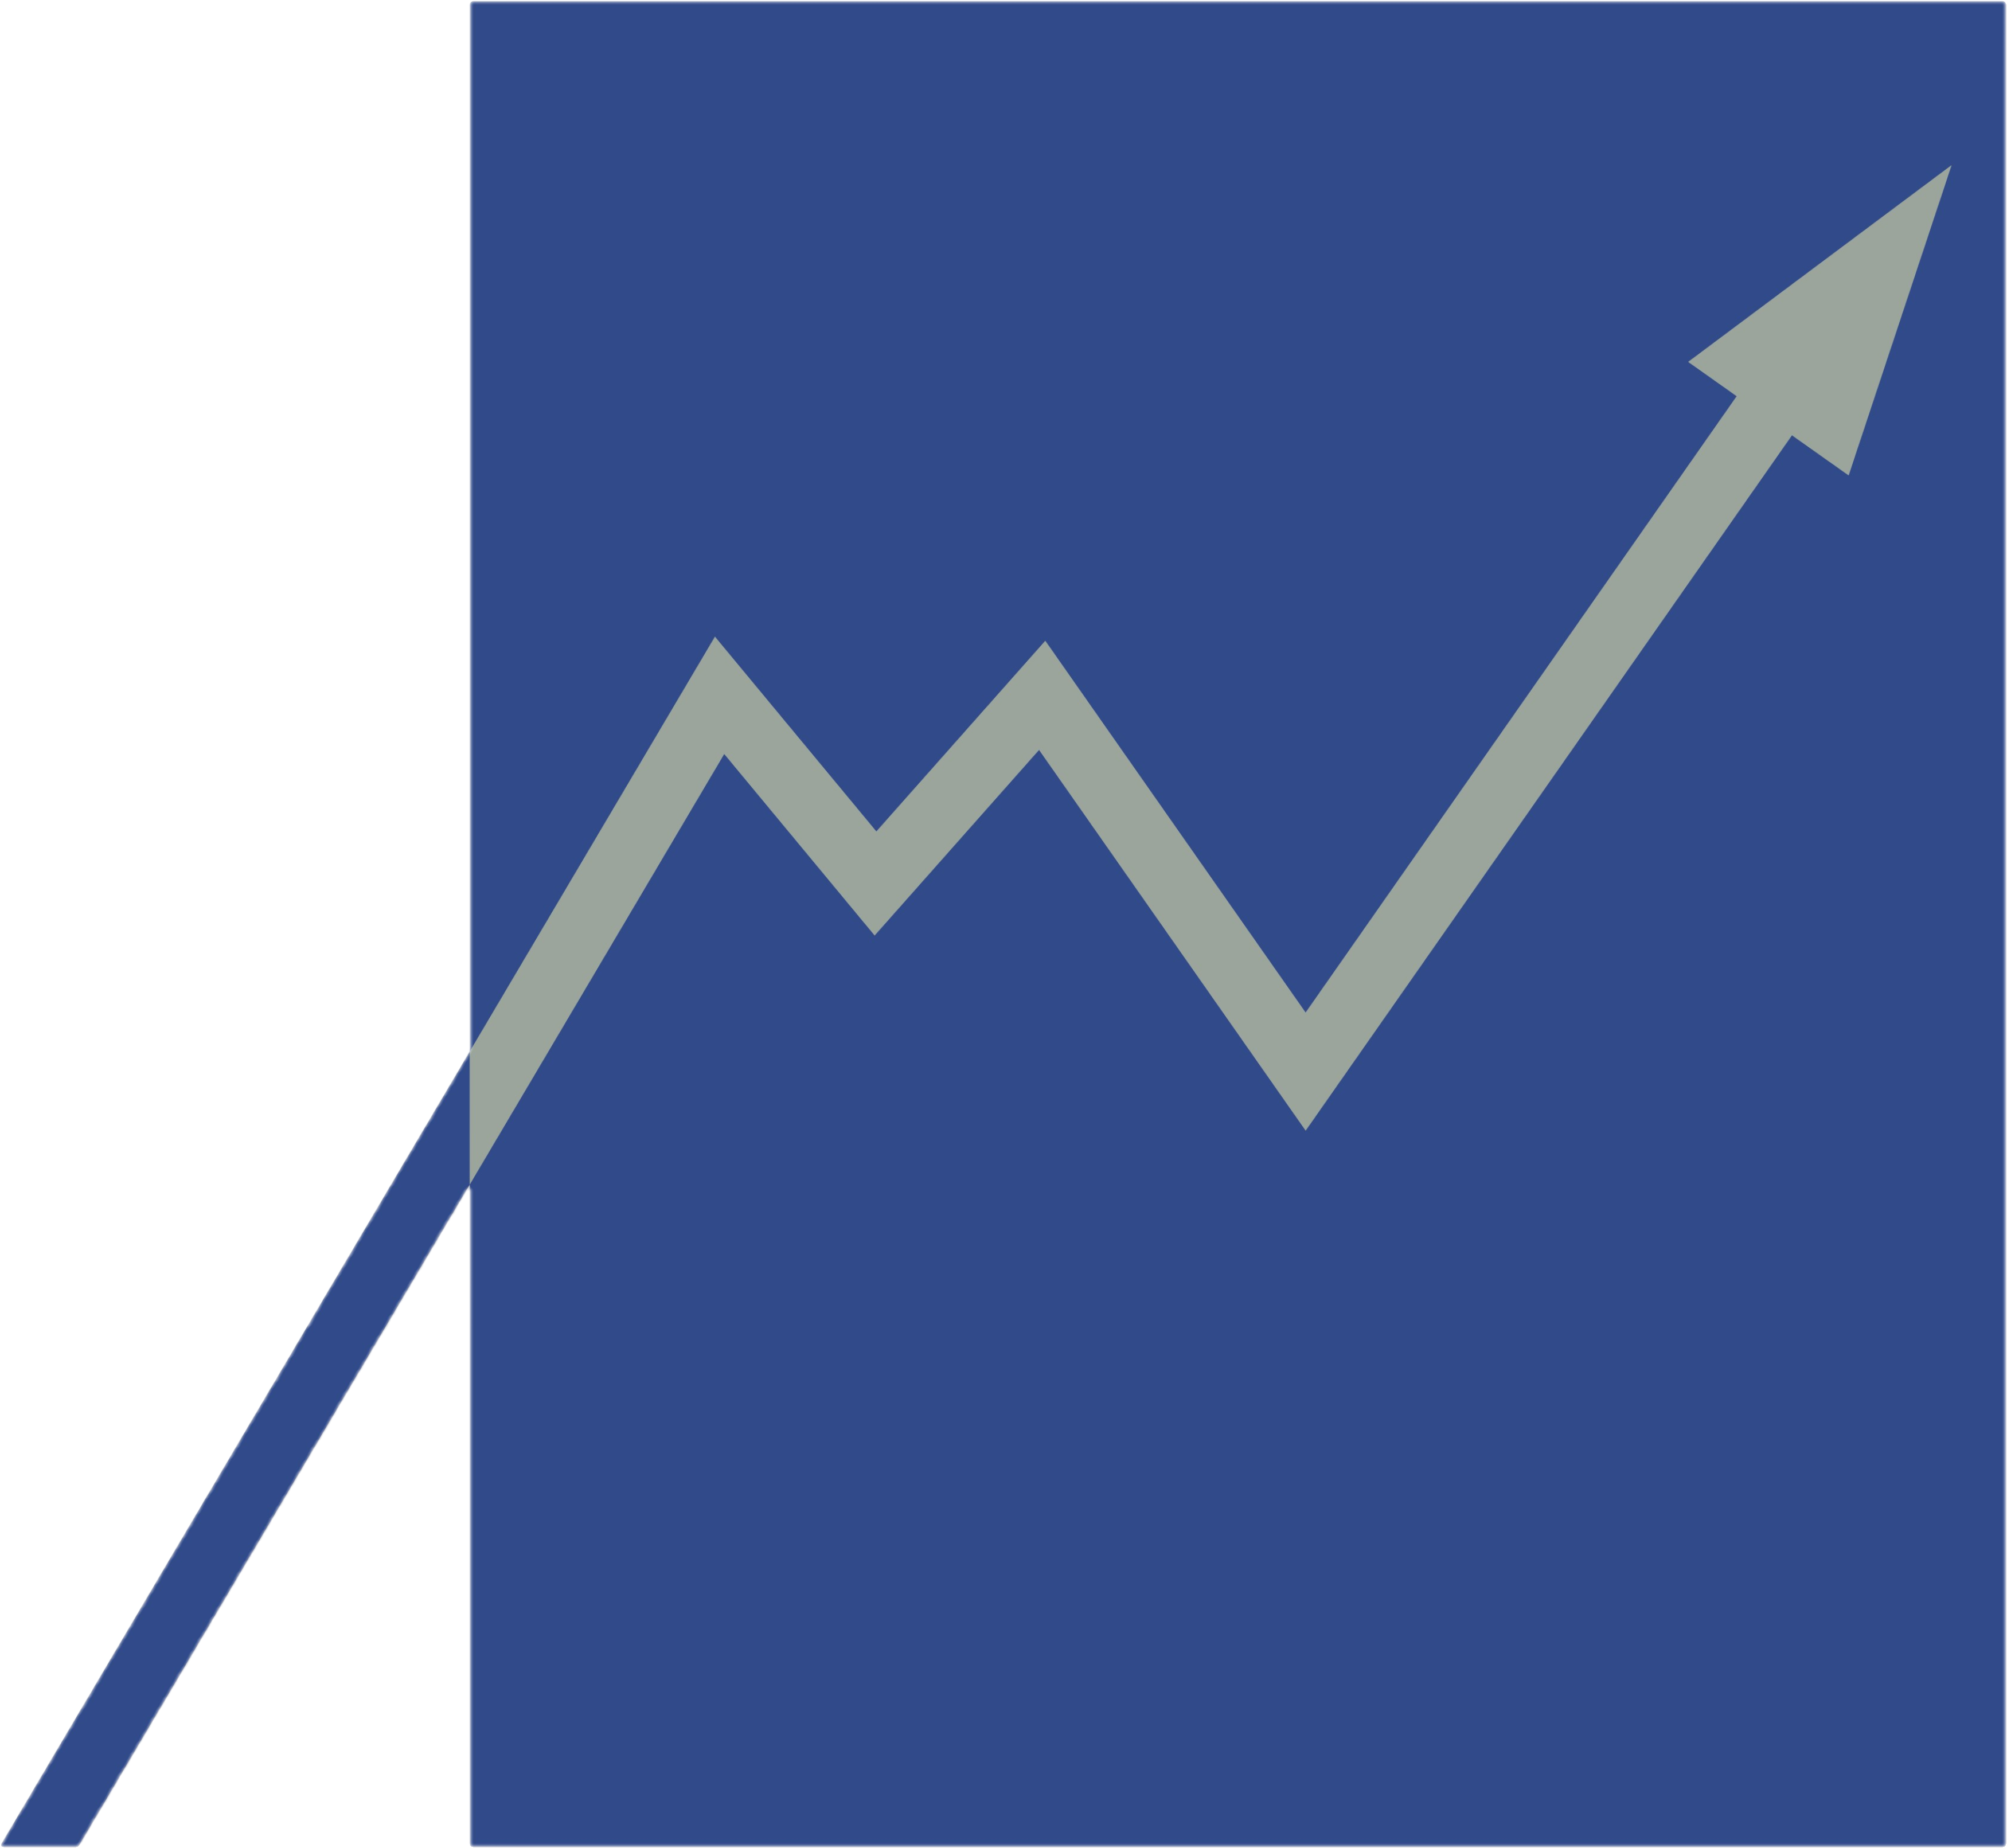 Blue graph showing a grew arrow pointing in the direction of upward growth